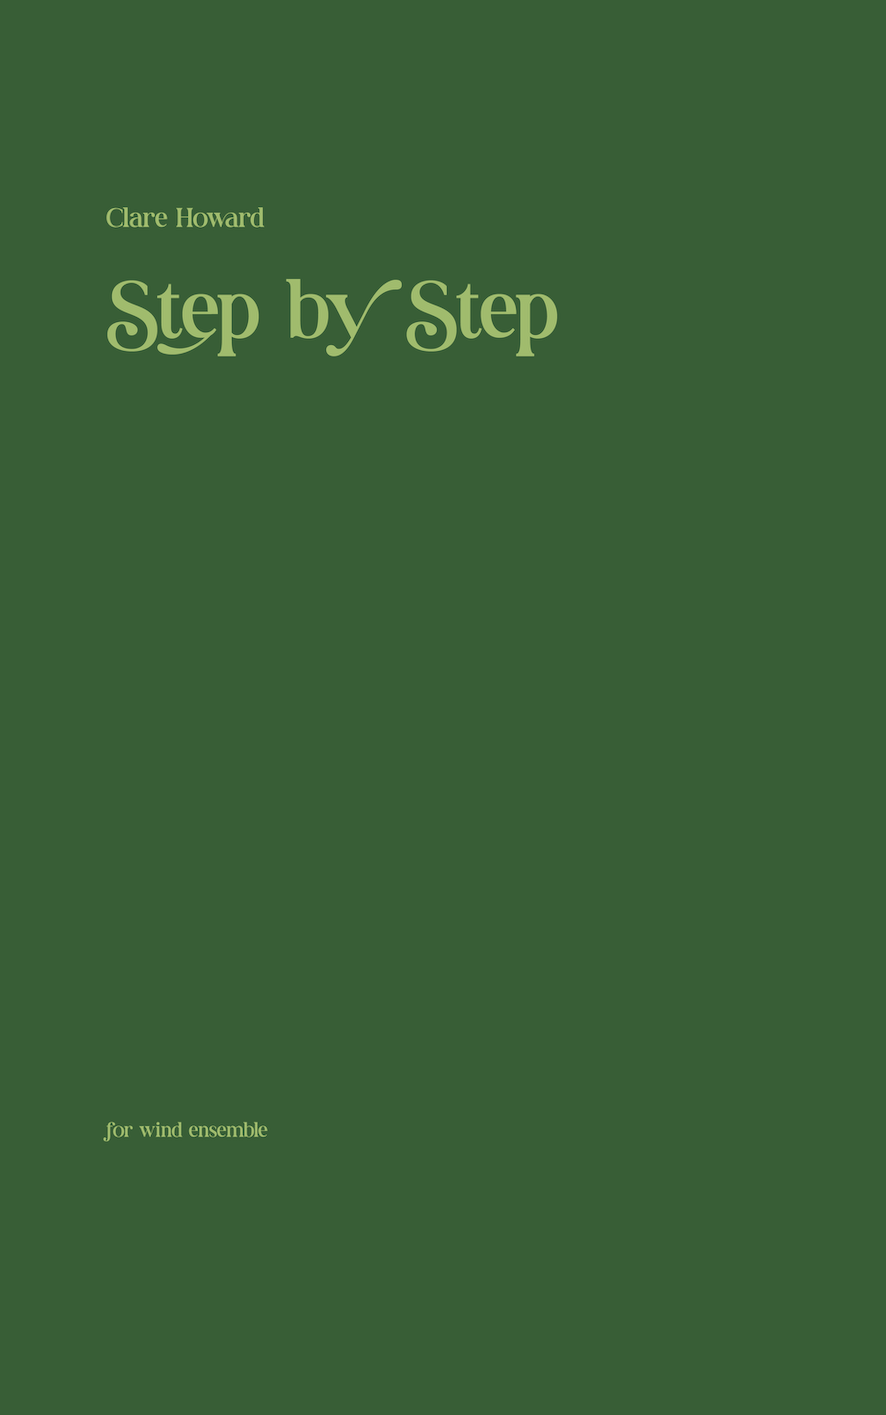 Step By Step by Clare Howard